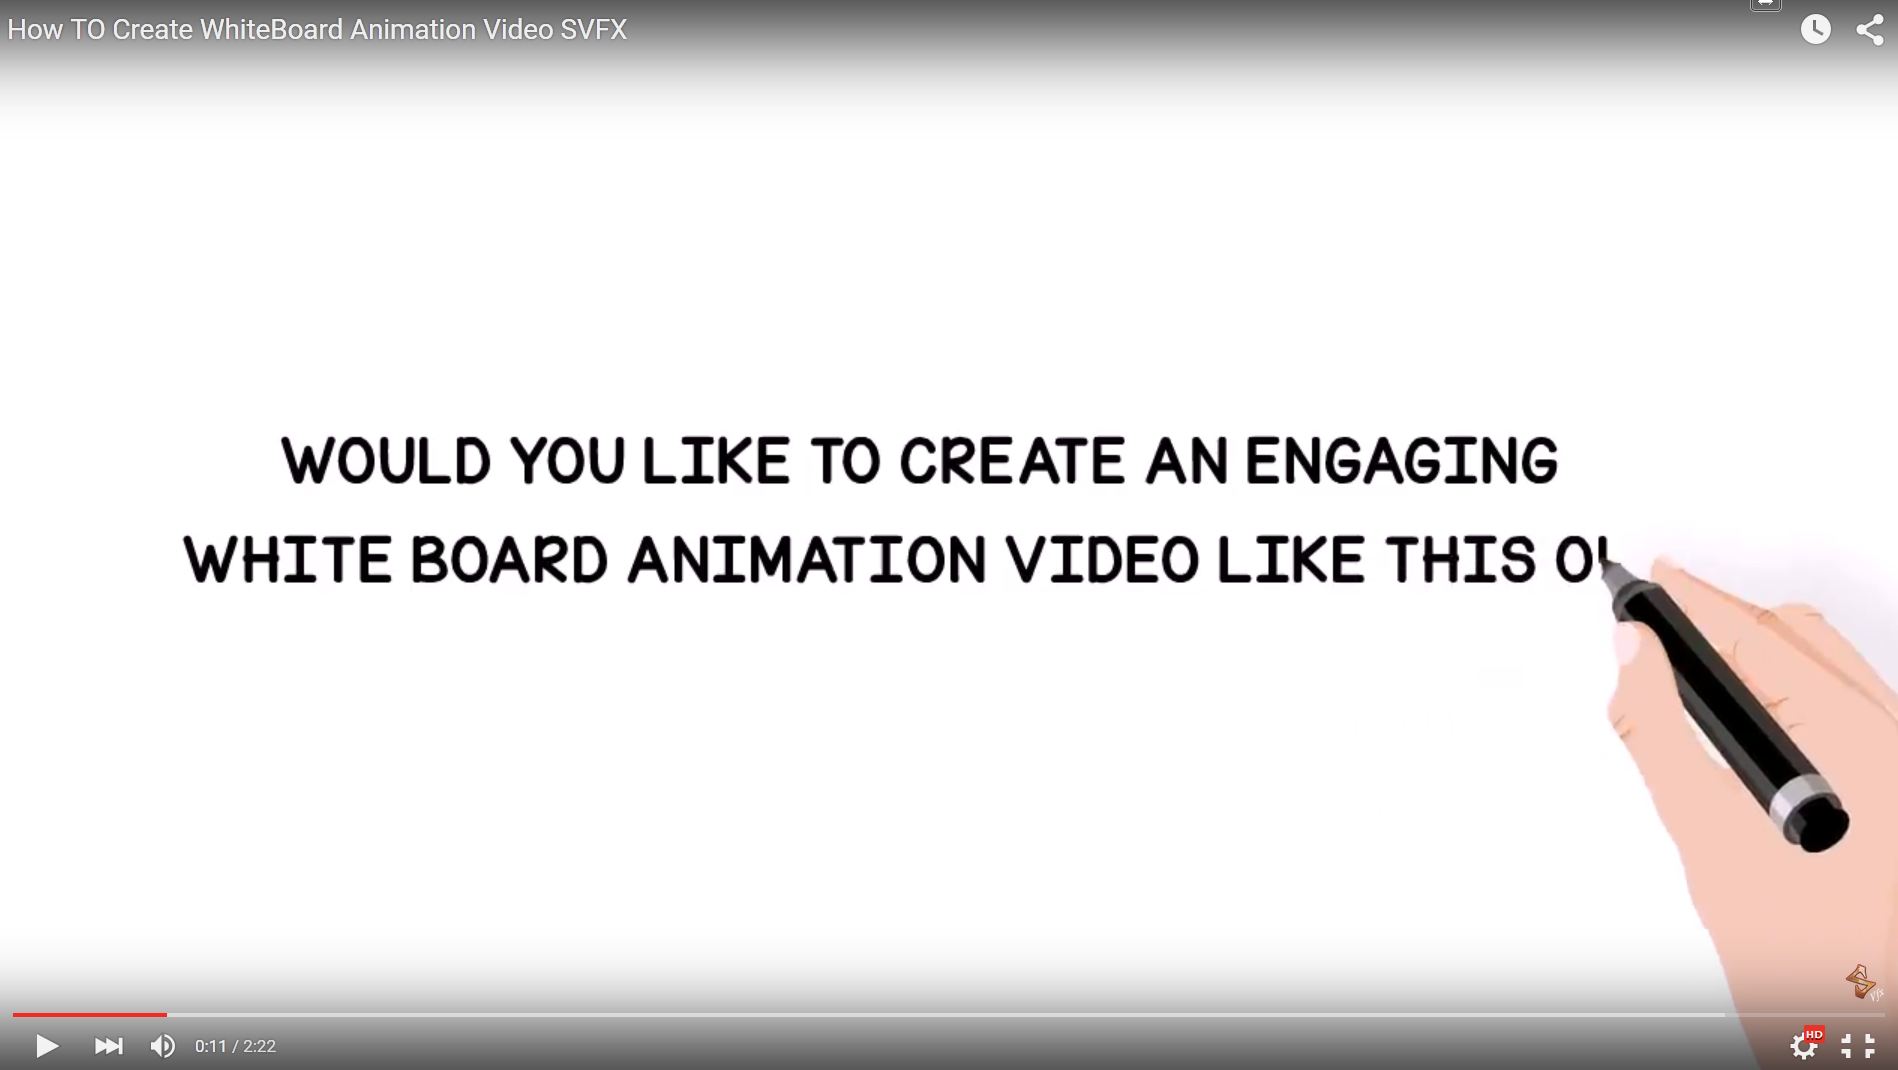 How TO Create WhiteBoard Animation Video SVFX